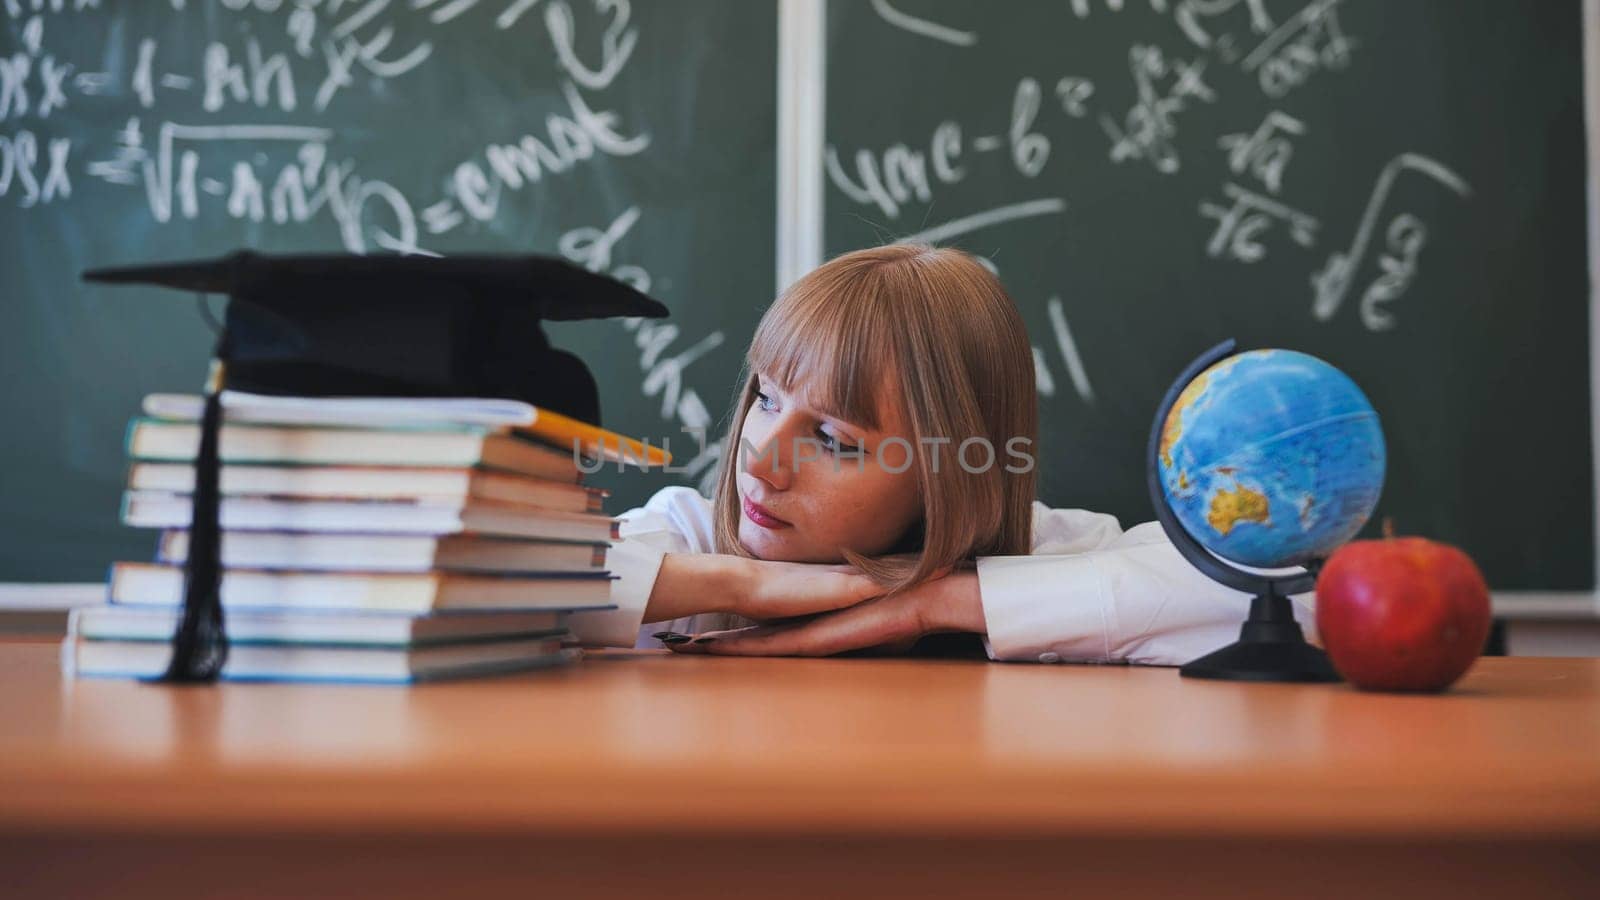 A high school girl poses against a backdrop of books, a globe and a graduation cap. by DovidPro